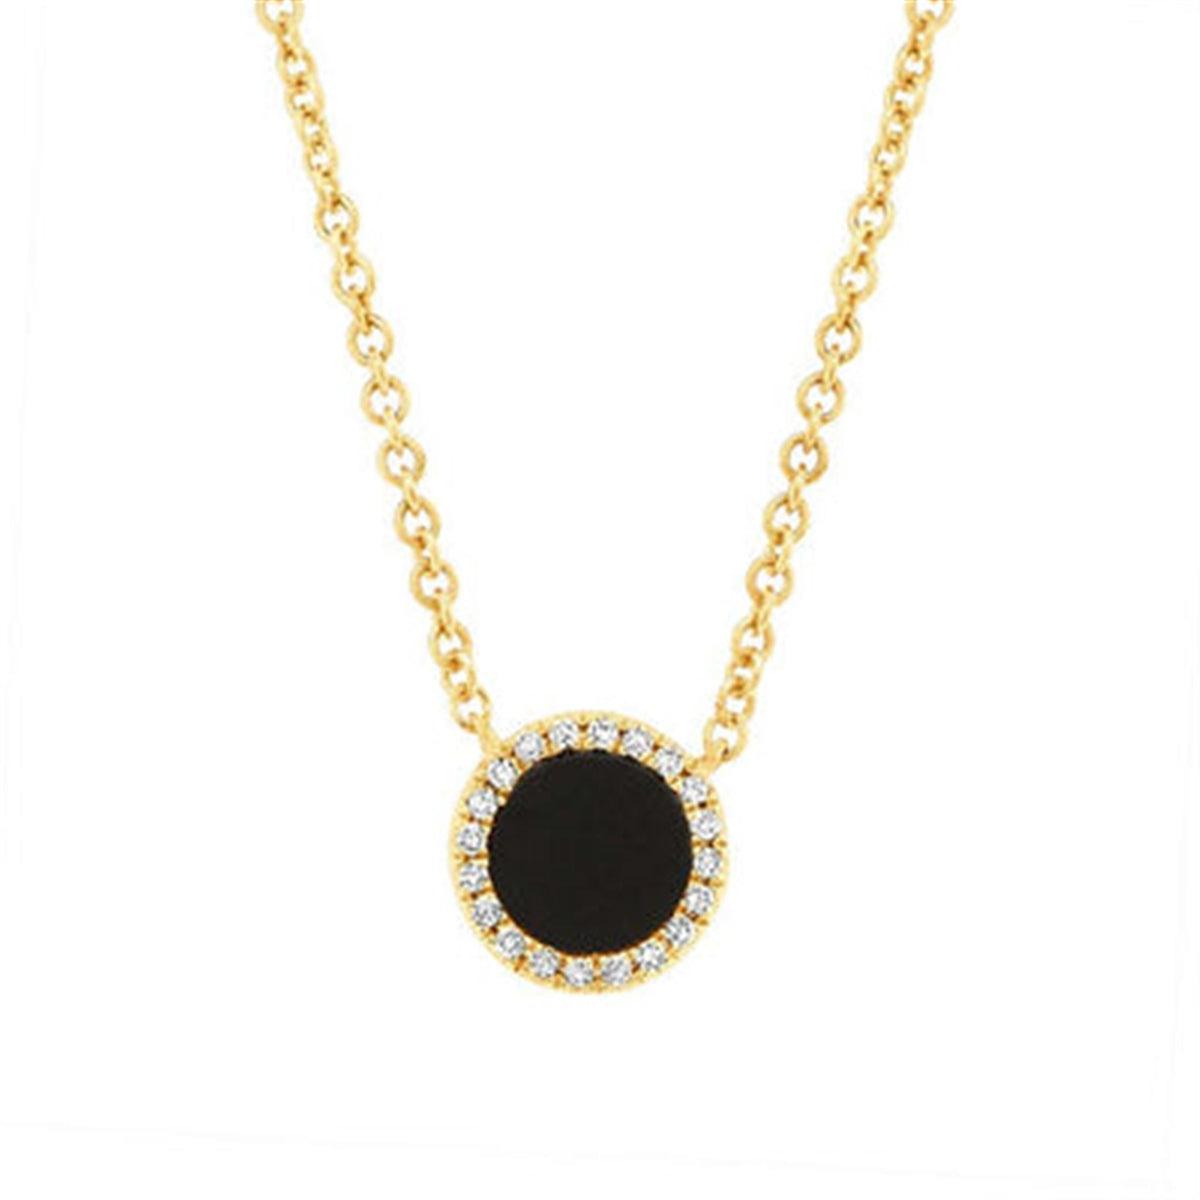 Shy Creation 14K Yellow Gold Round Black Onyx Inlay Pendant on an 18' Adjustable Chain